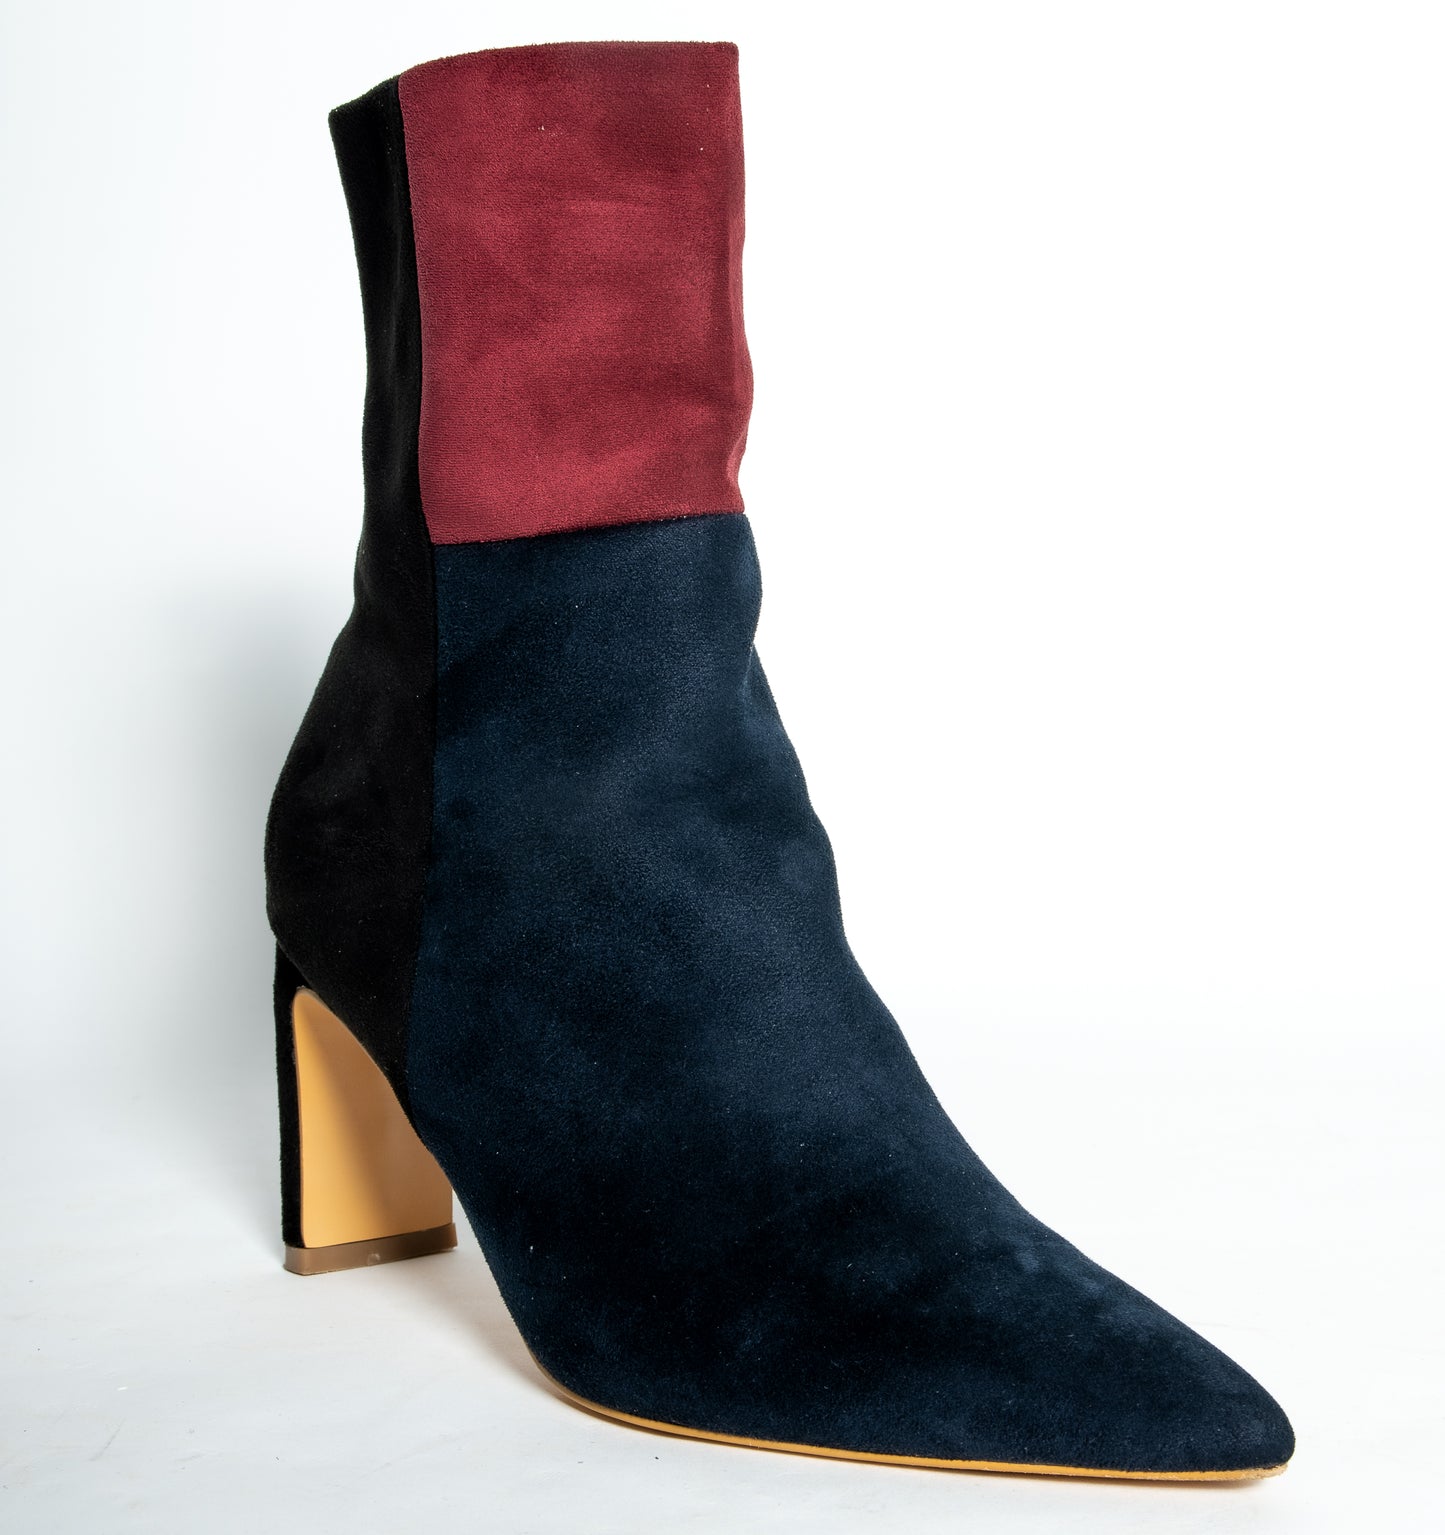 Simone Bootie - Suede Upper and Padded Insole plus size heels